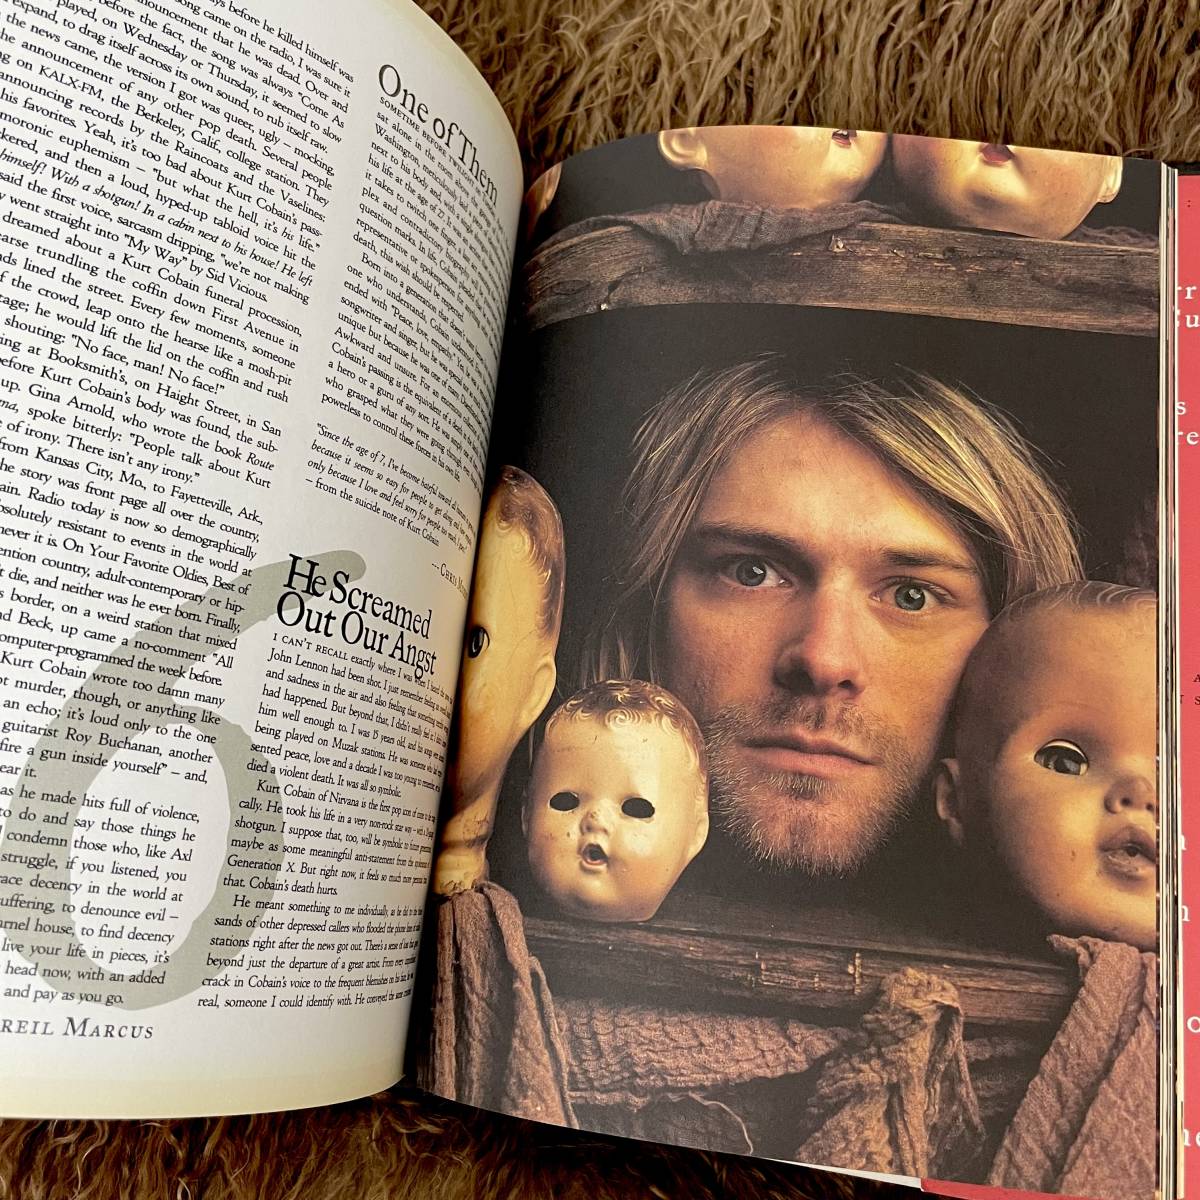 Cobain by the editors of Rolling Stone 洋書 1994年 ニルバーナ カート コバーン ローリングストーン 写真_画像8